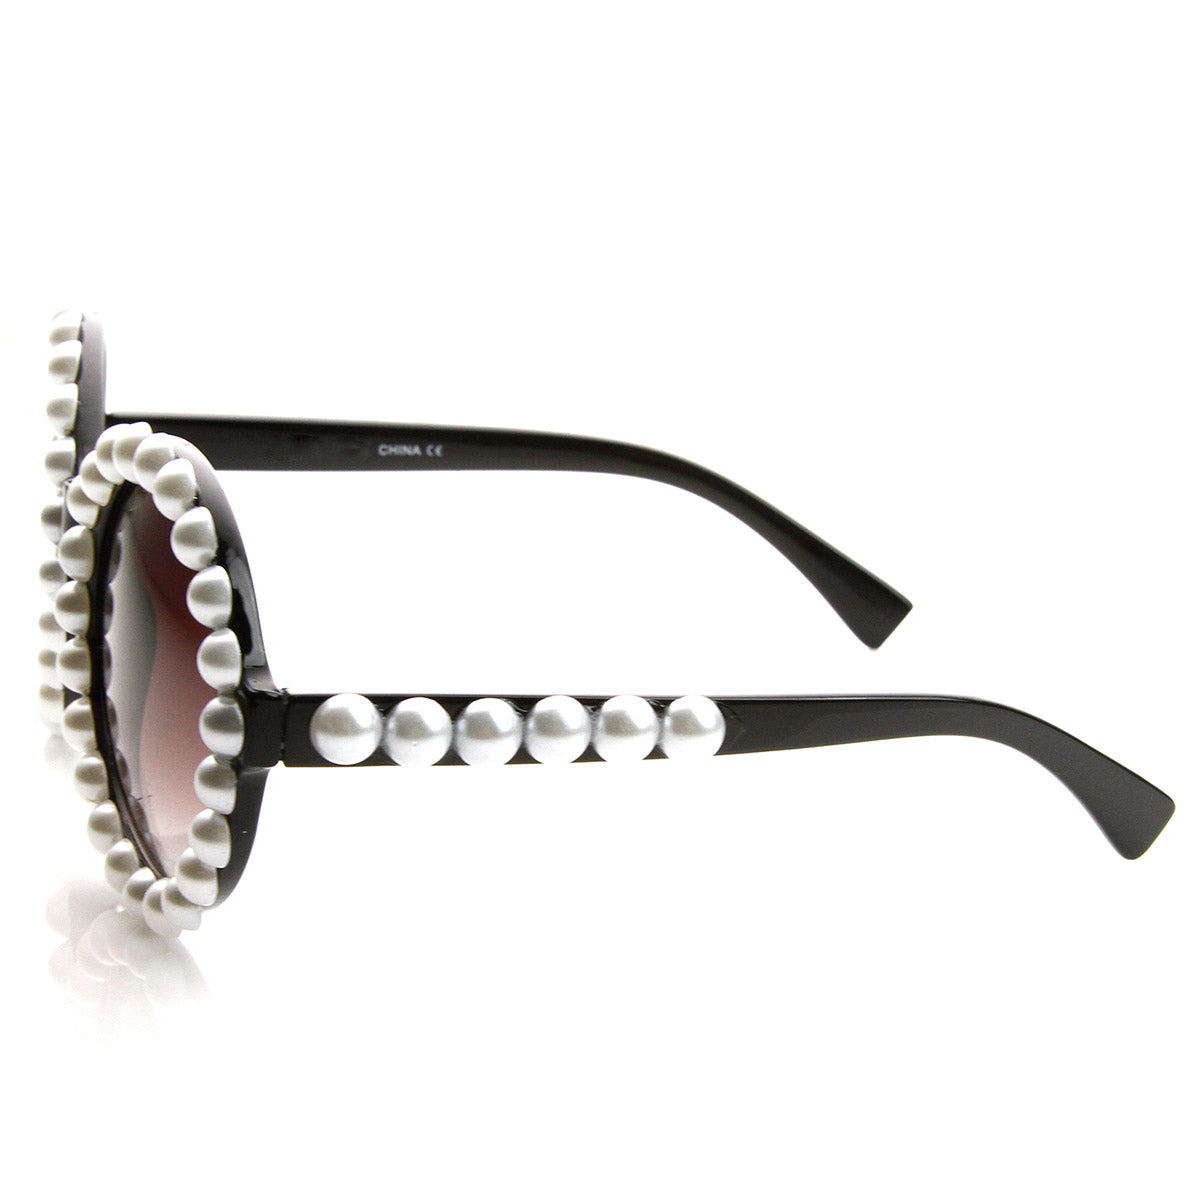 ROUND-FRAME SUNGLASSES WITH PEARLY PRINCESS CHAIN –